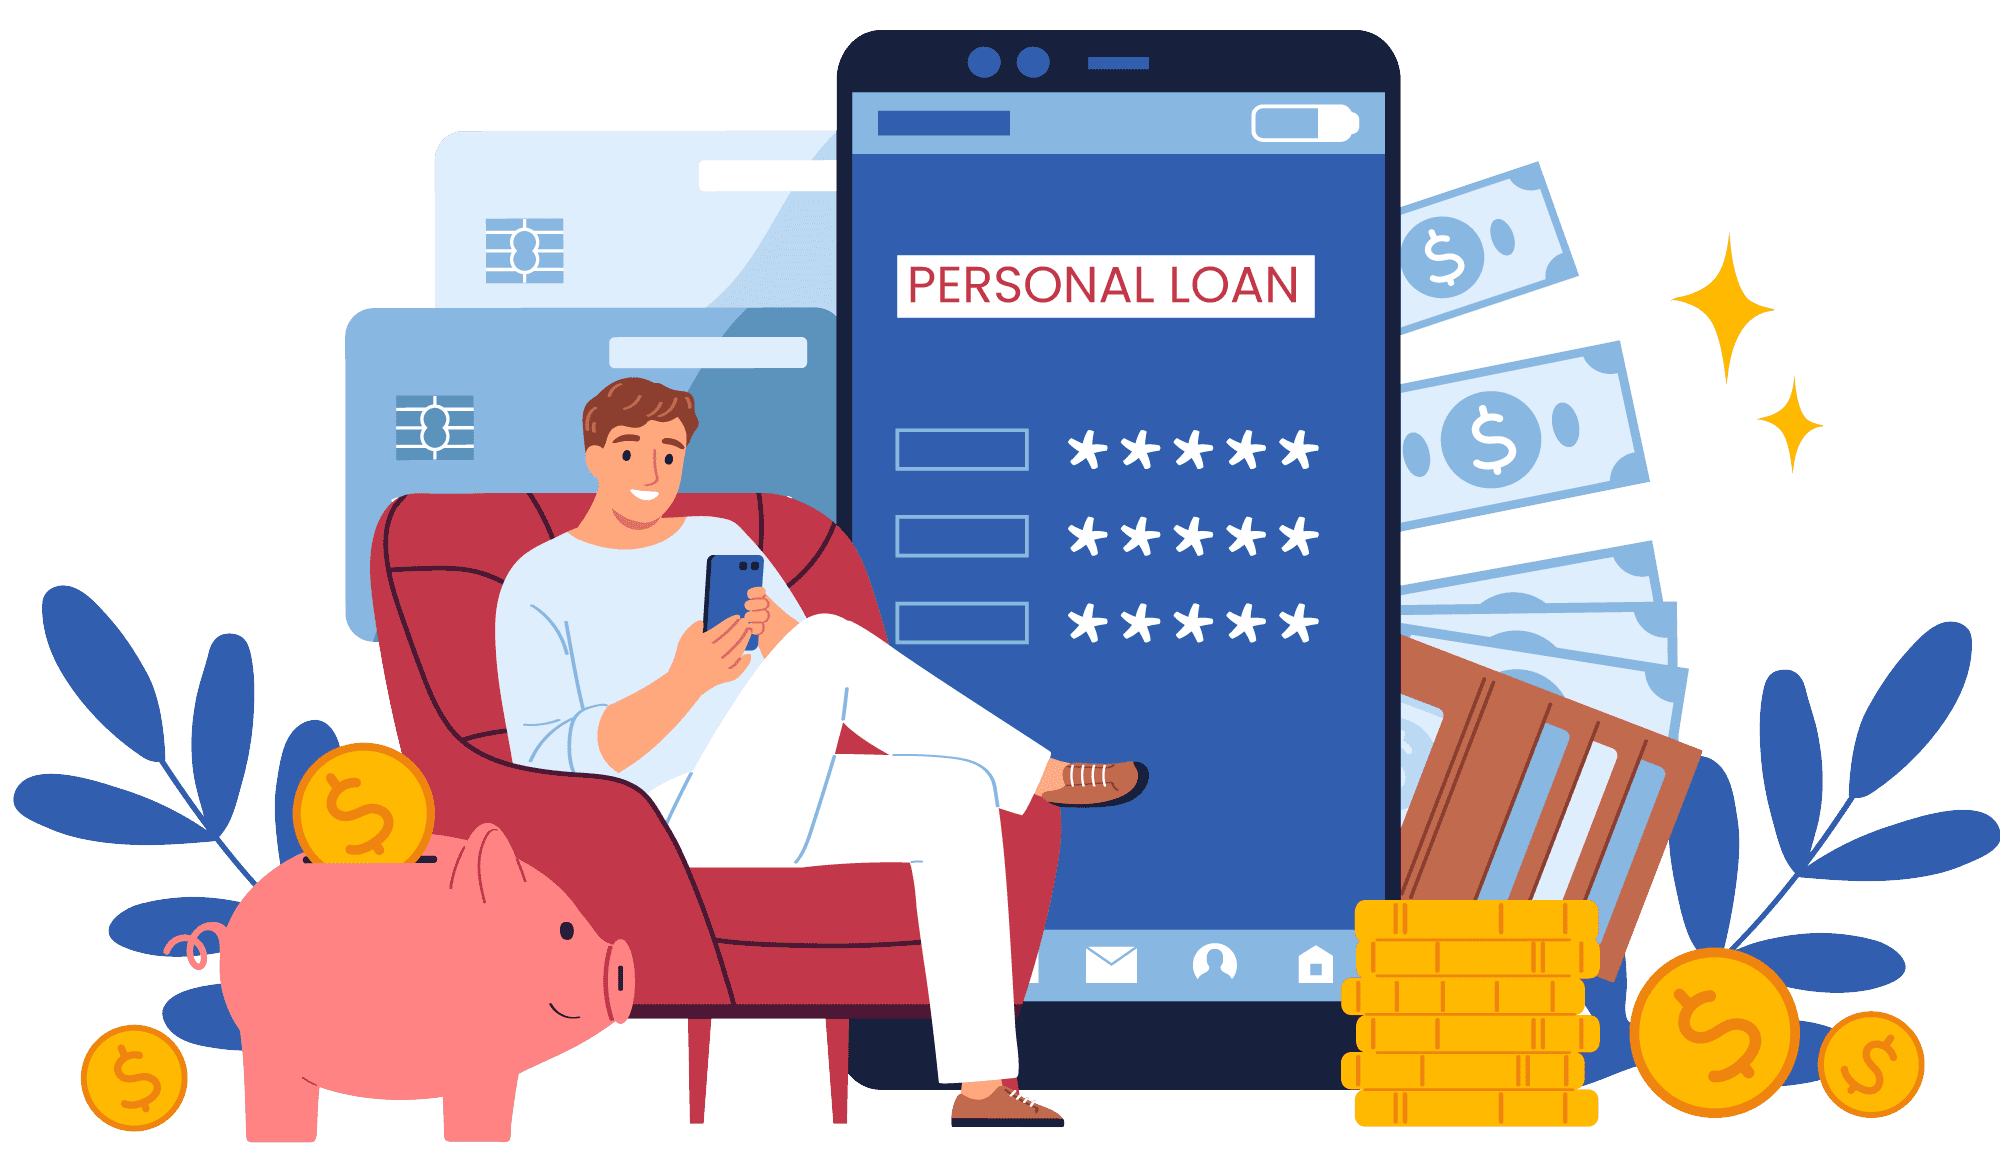 Apply for quick personal loans online